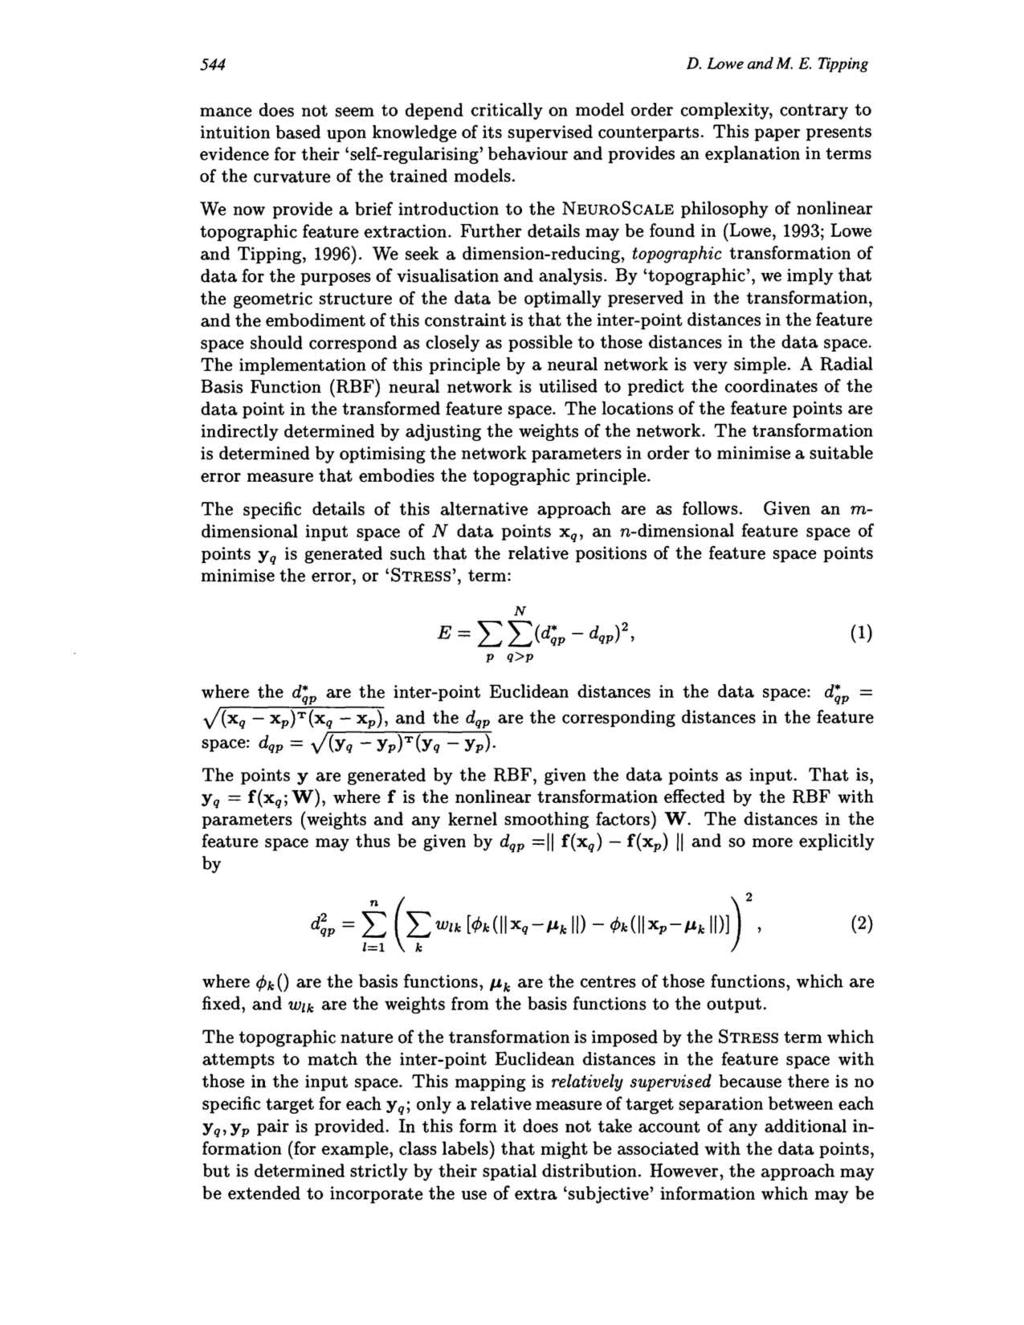 544 D. Lowe and M. E. Tipping mance does not seem to depend critically on model order complexity, contrary to intuition based upon knowledge of its supervised counterparts.